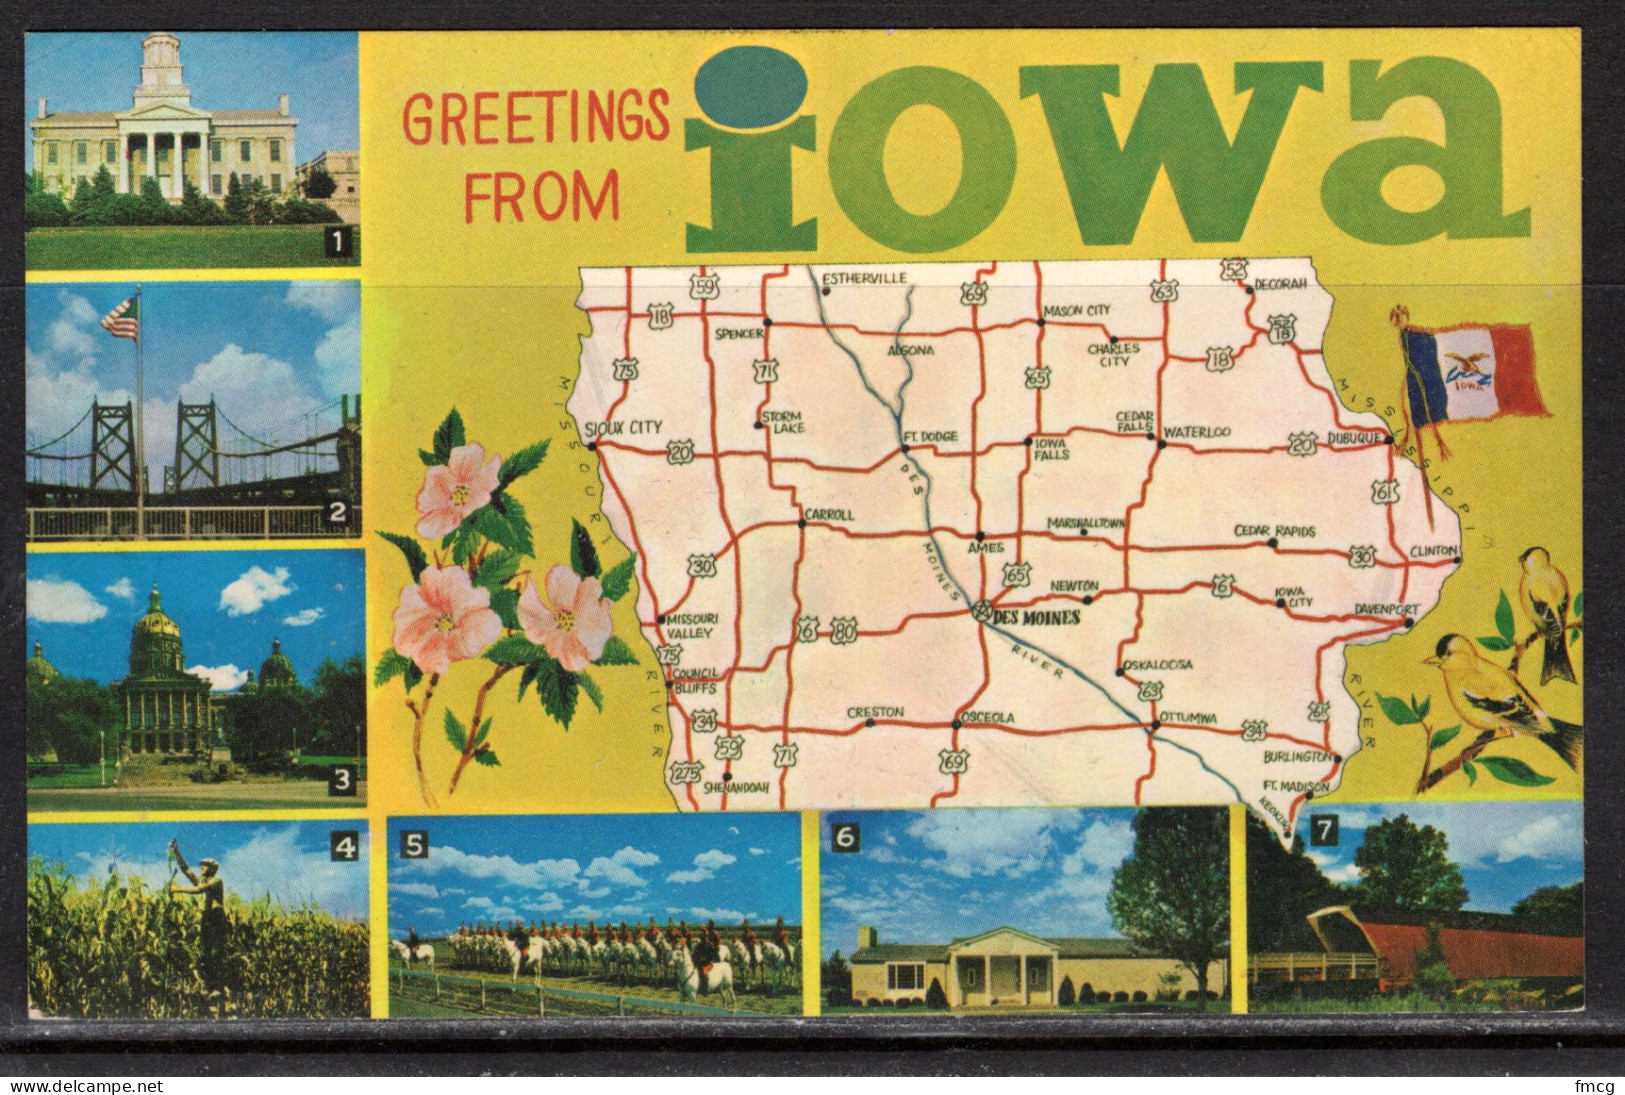 Map, United States, Iowa, New - Cartes Géographiques